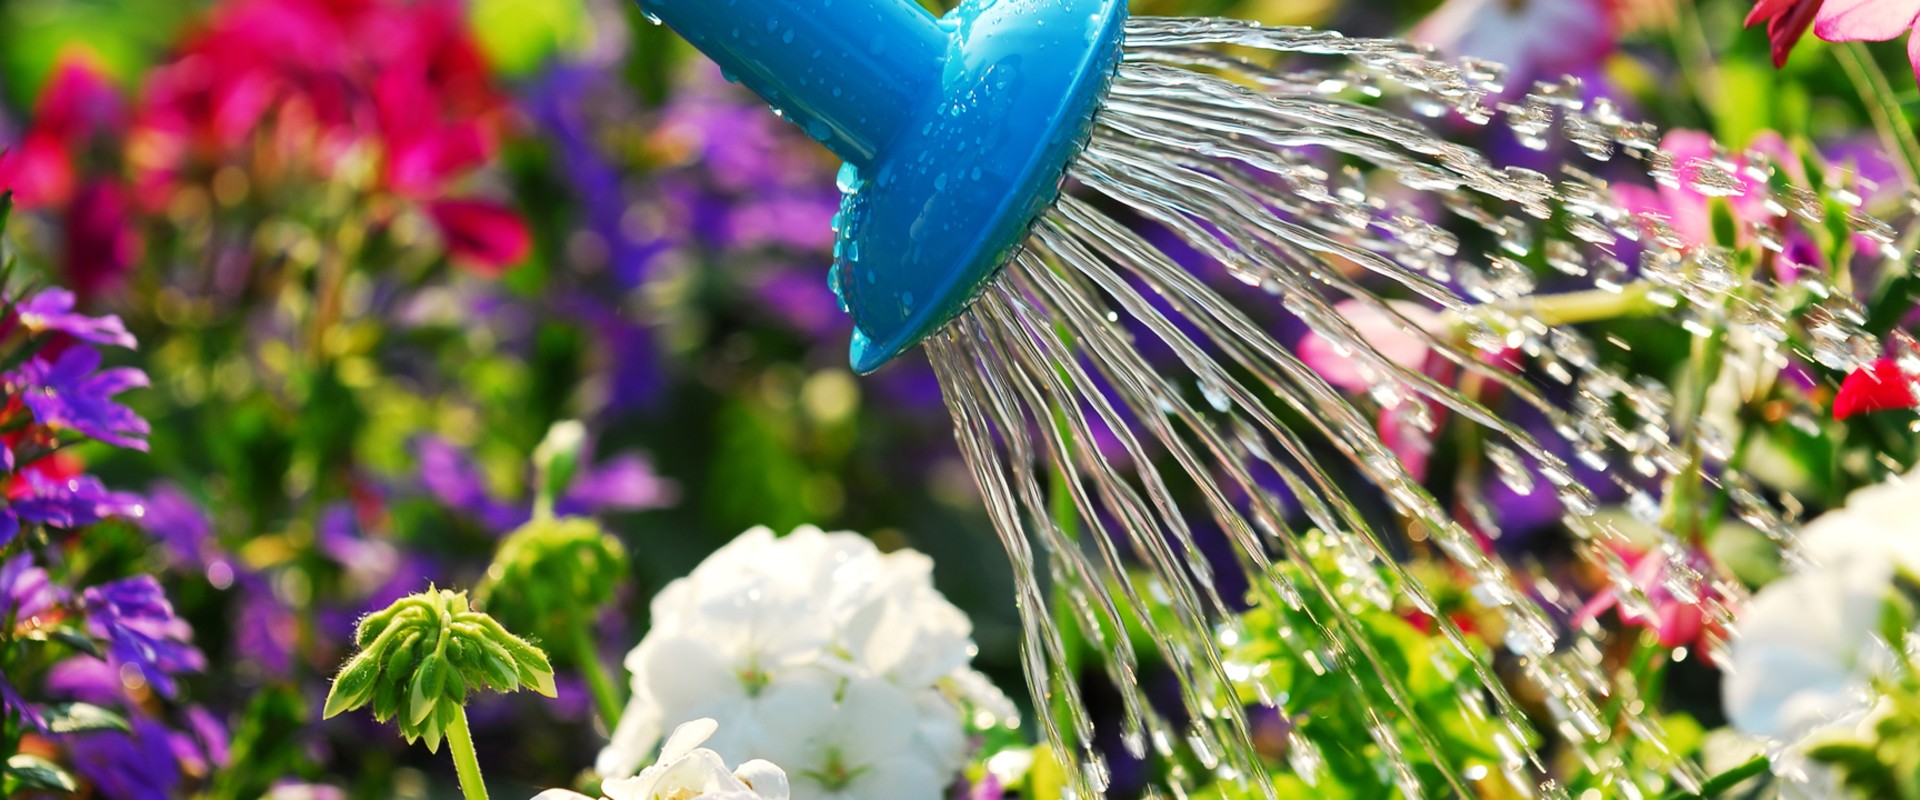 10 Proven Ways to Conserve Water in Your Garden